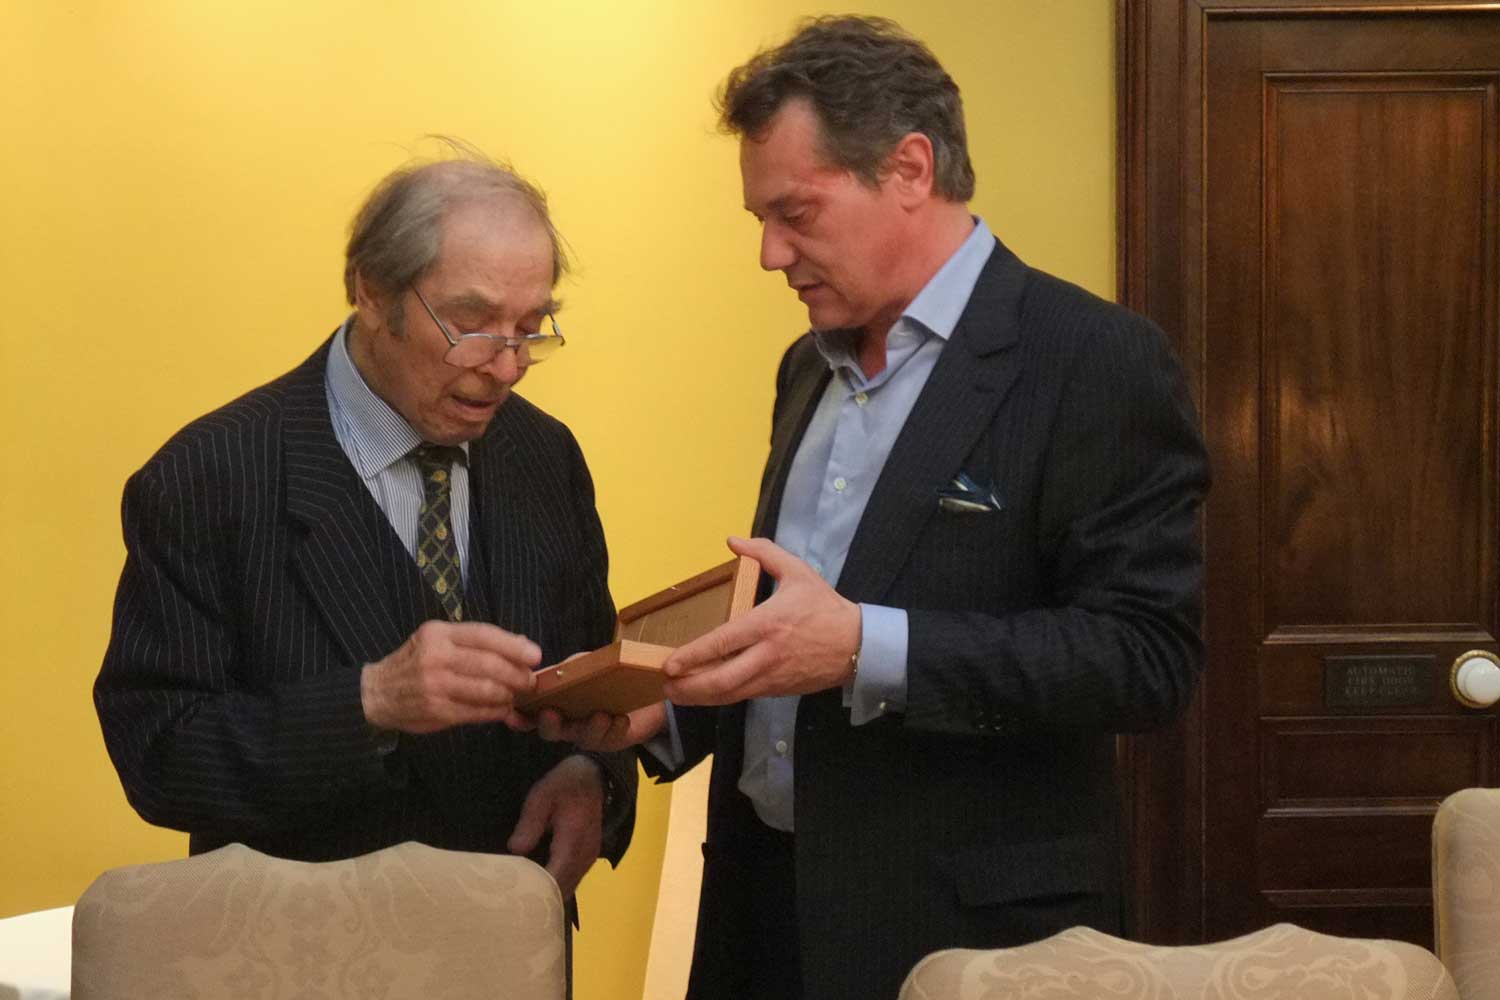 François-Paul Journe honouring his mentor George Daniels with a special Chronomètre Souverain during an intimate dinner organized by John and William Asprey in 2010